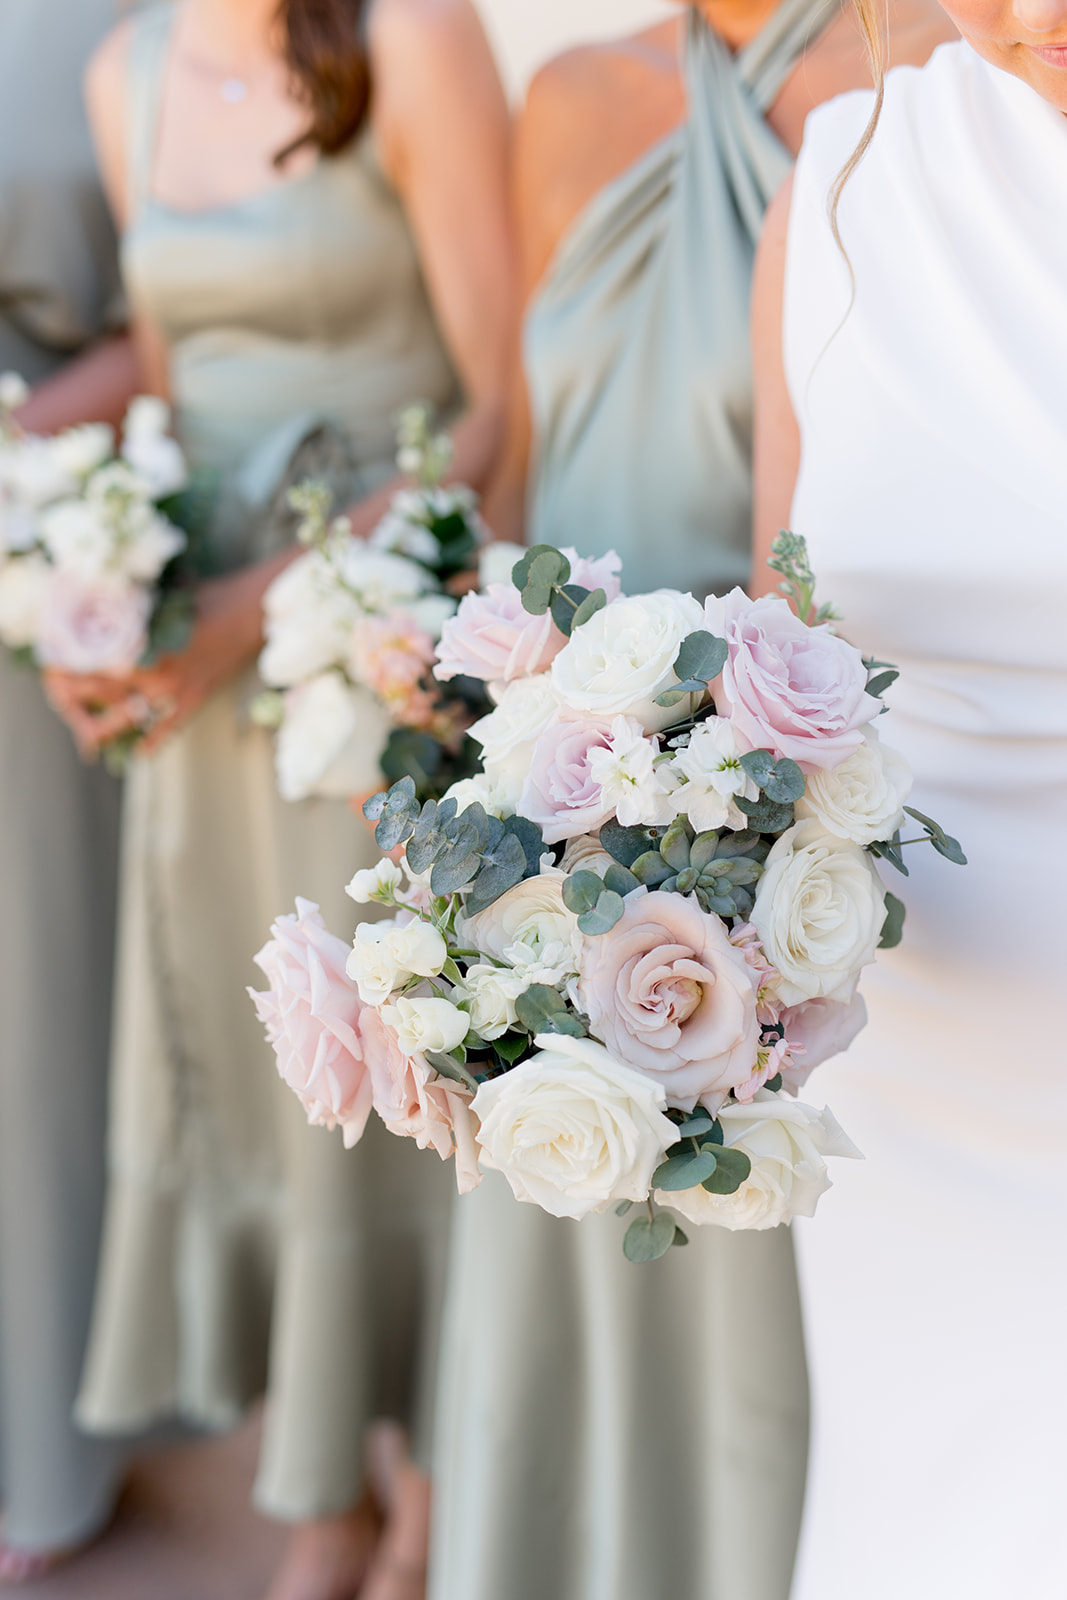 Bridal bouquet held by bride with bridesmaids in foreground in green dresses holding bouquets.